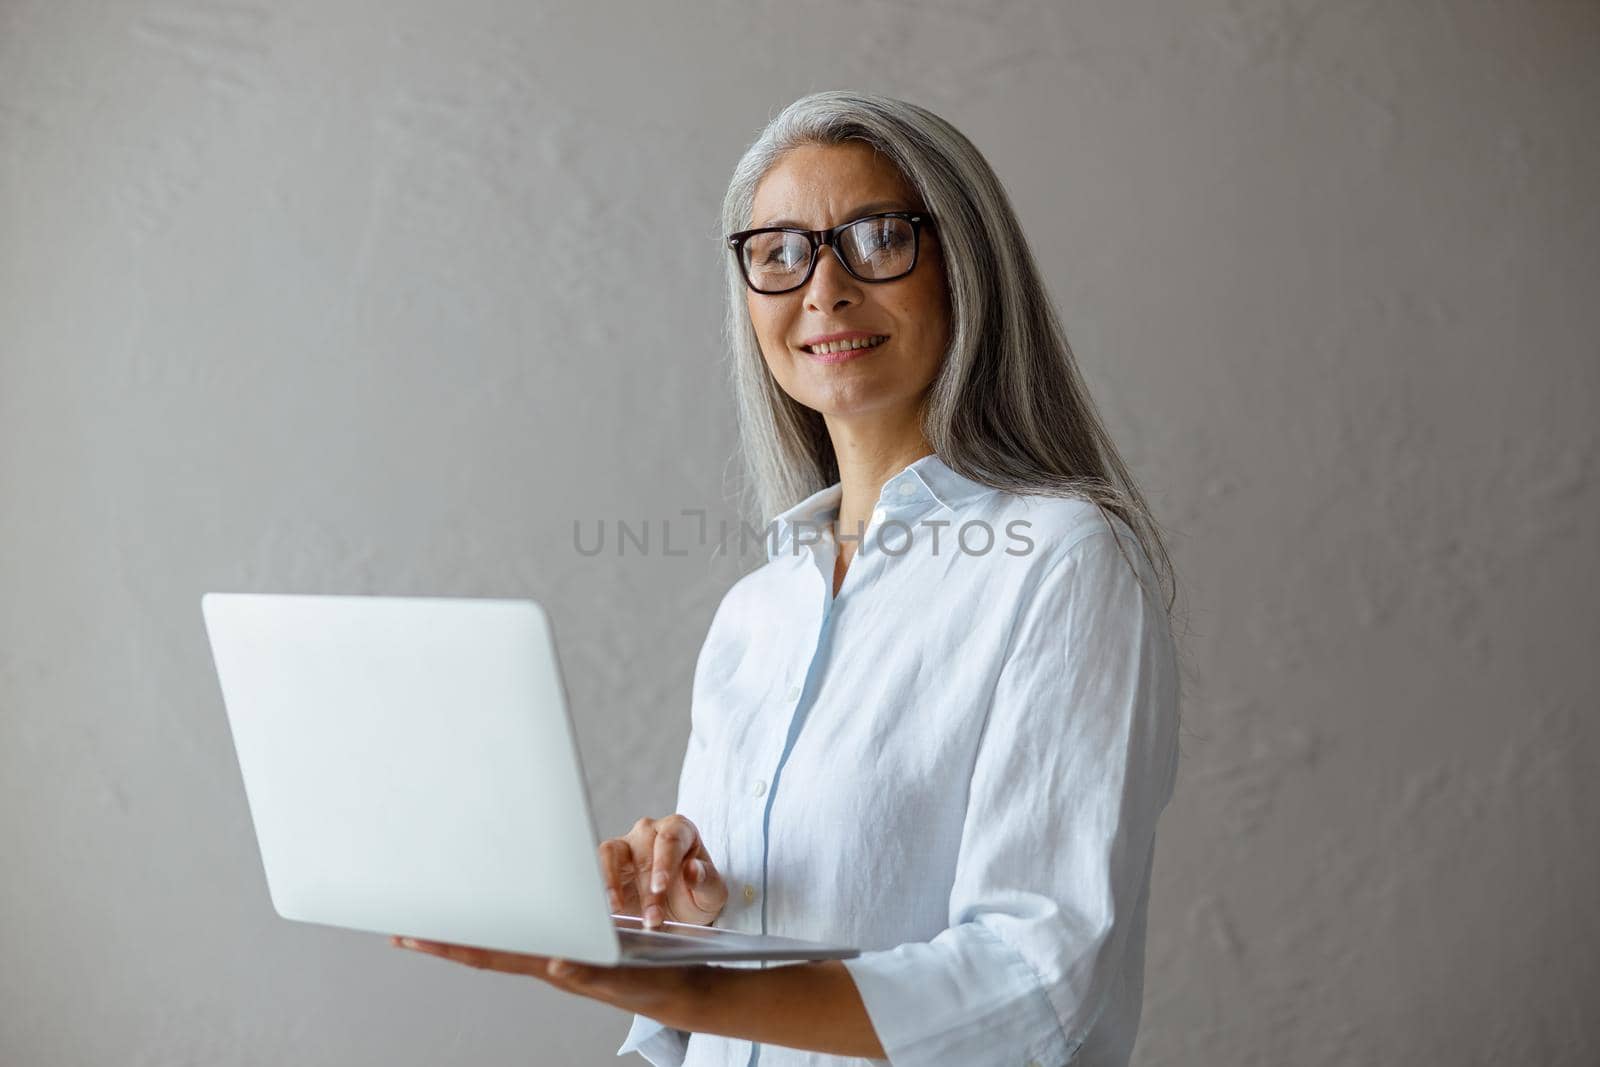 Smiling silver haired middle aged Asian woman in white blouse works on modern laptop standing near grey stone wall in studio